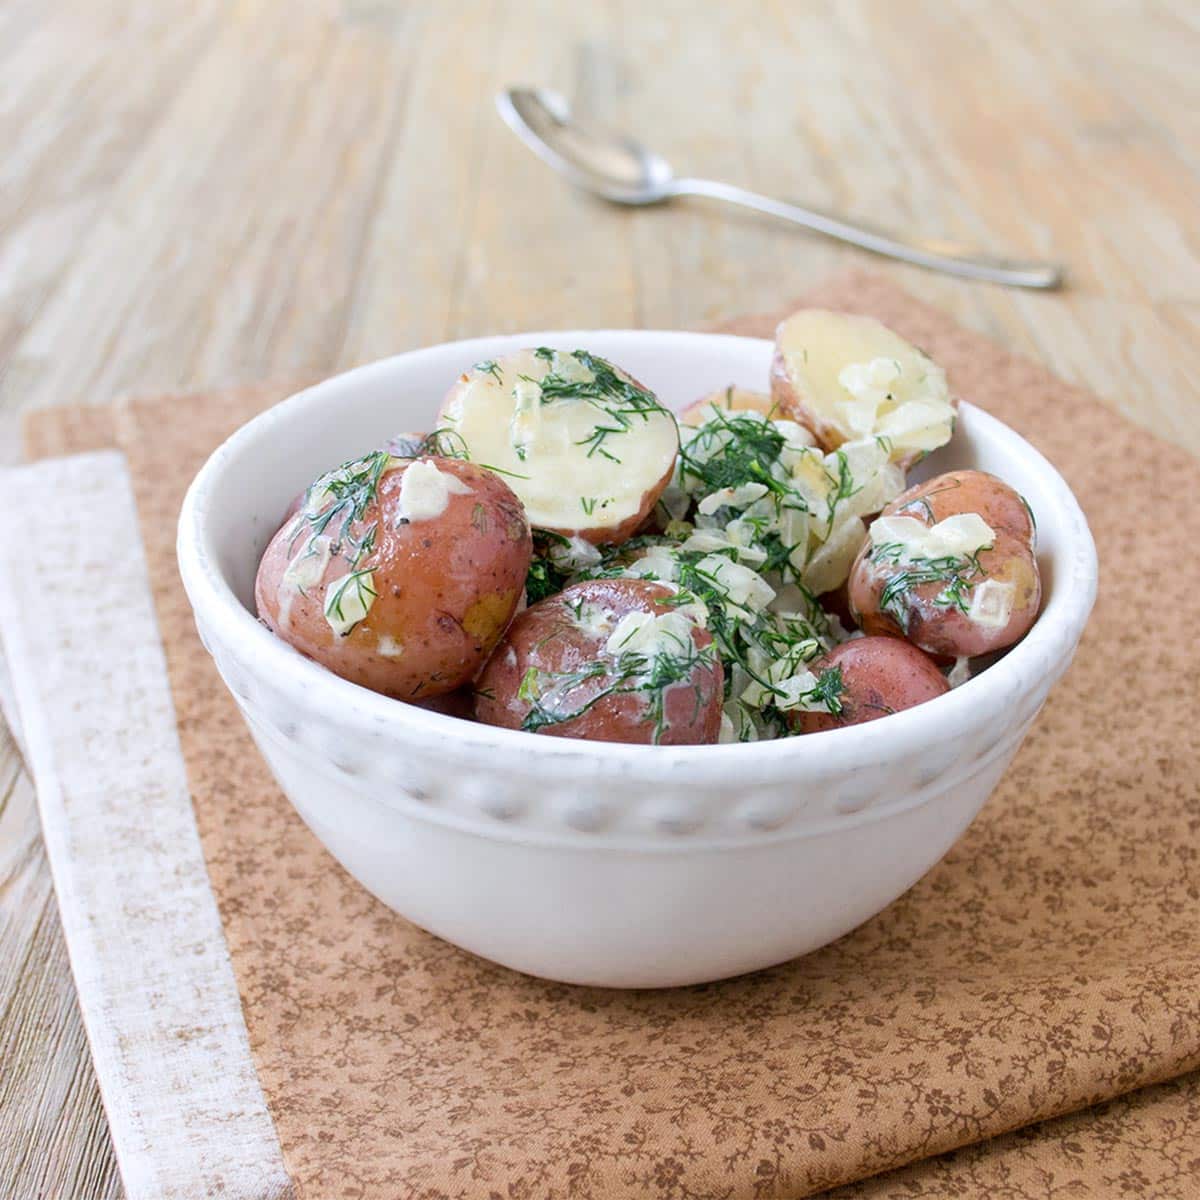 A white bowl full of halved red potatoes tossed with fresh dill, sauteed onions, and cream.